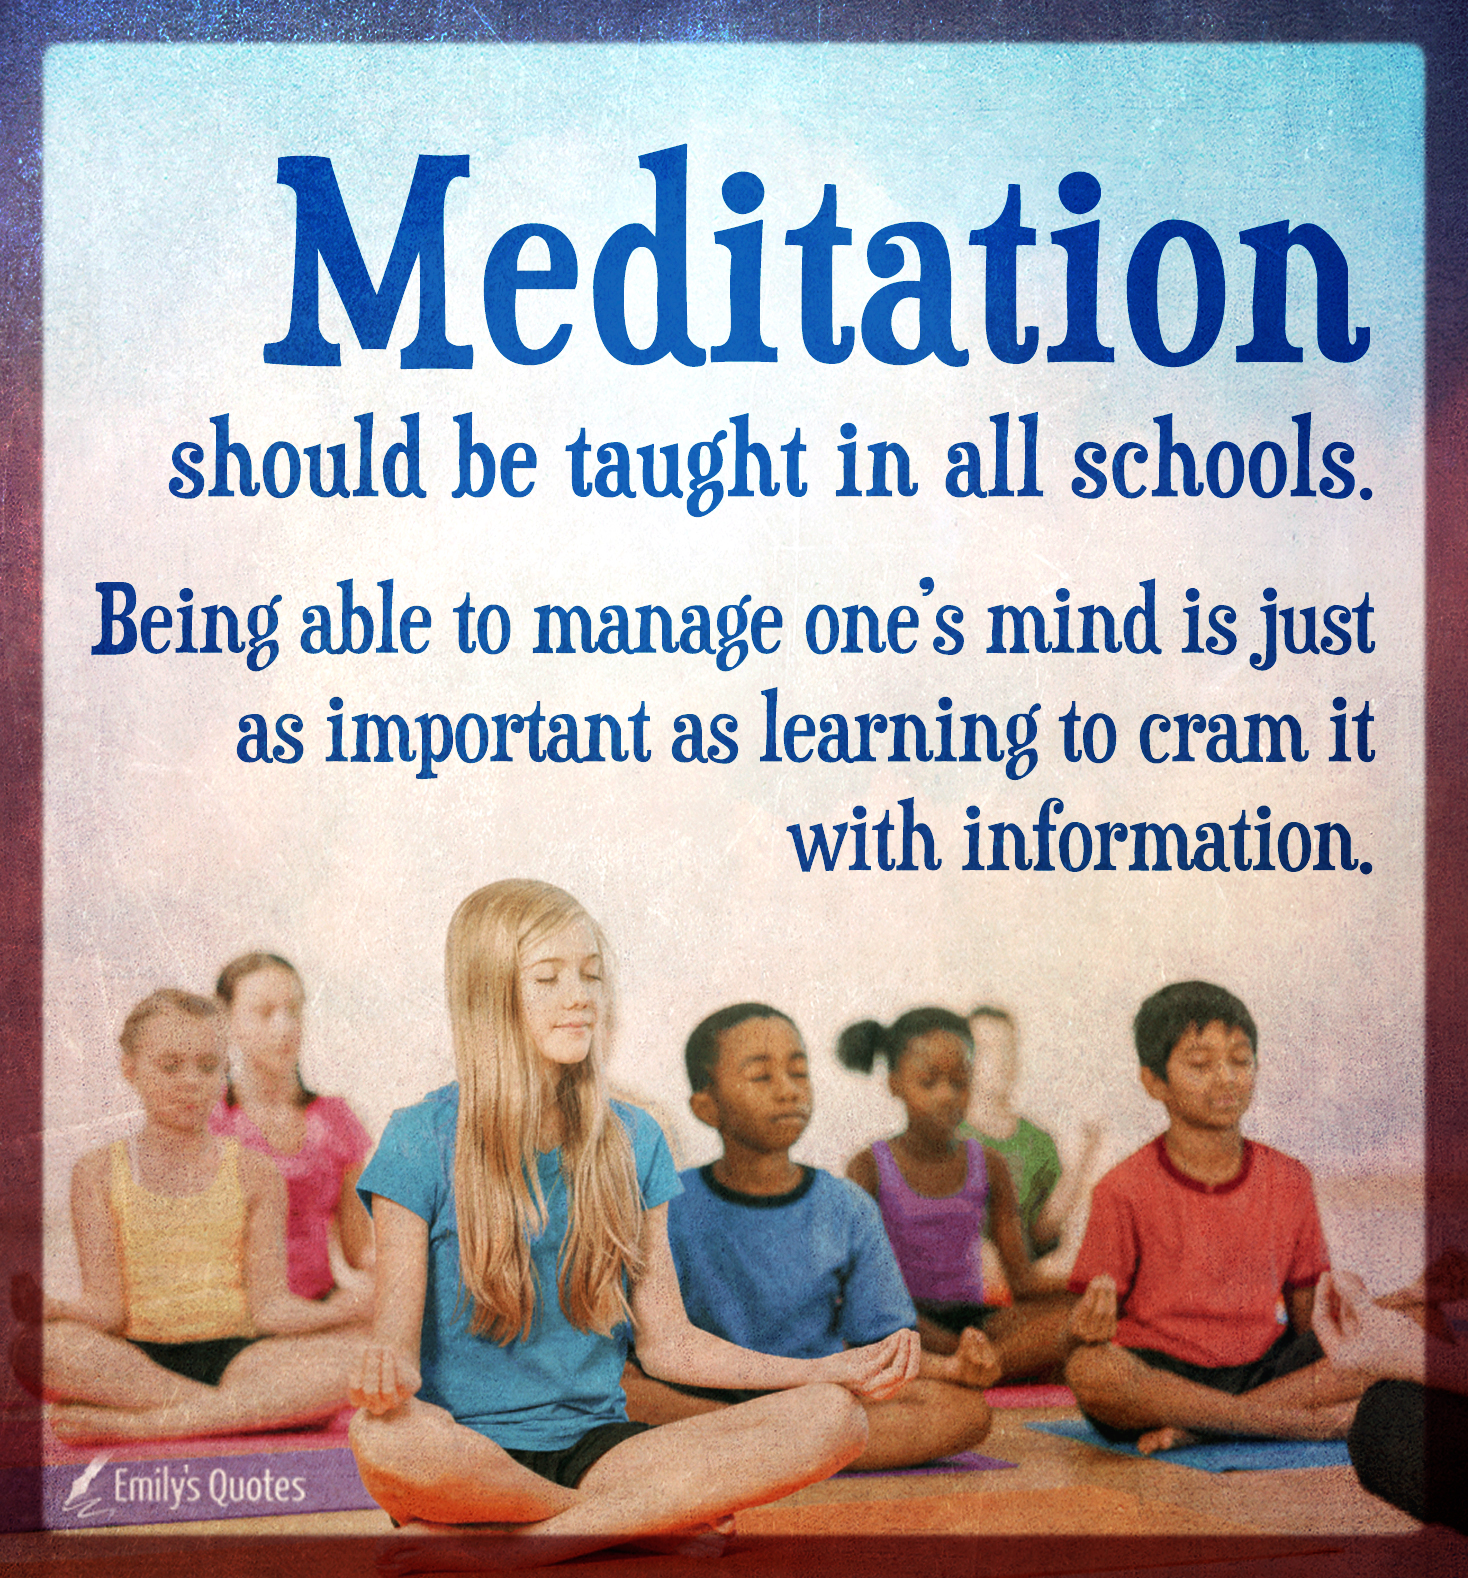 Meditation should be taught in all schools. Being able to manage one’s mind is